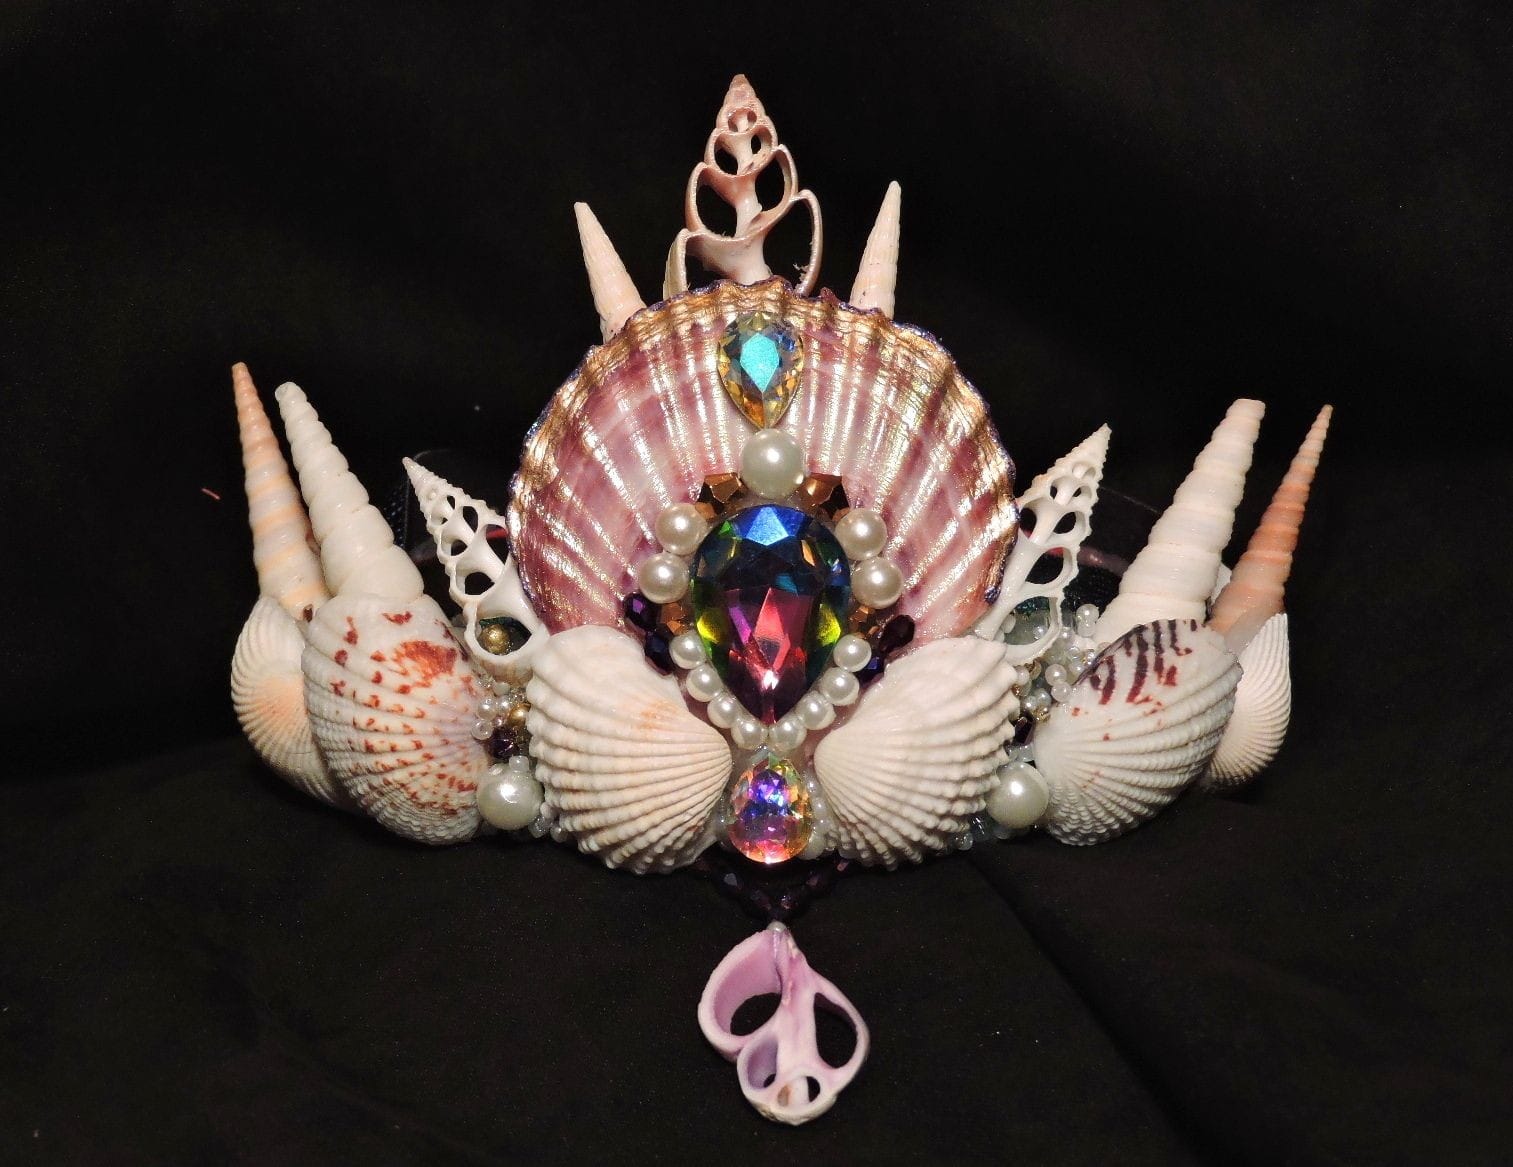 "Mermaid Crowns" by Jo-Anne Sullivan created by commission.